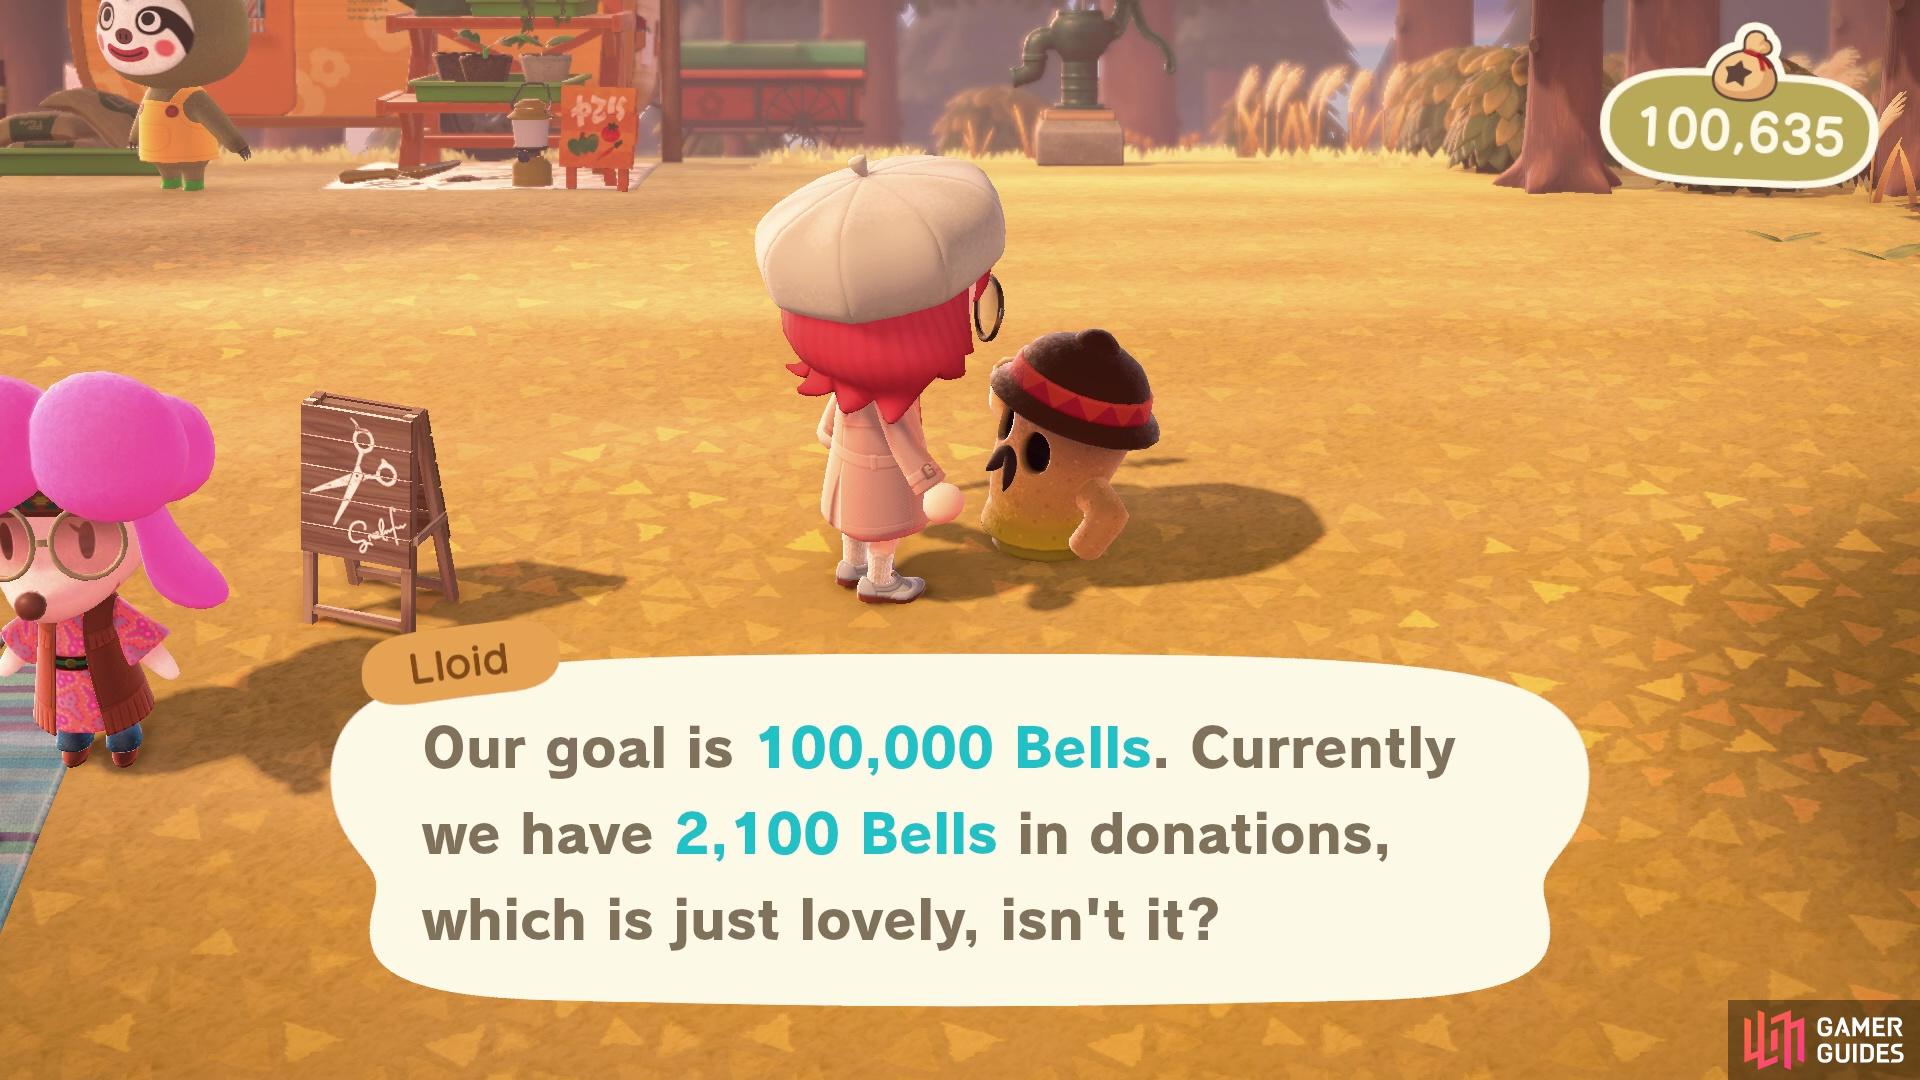 Pay Lloid the 100,000 Bells to build Redd’s shop. 